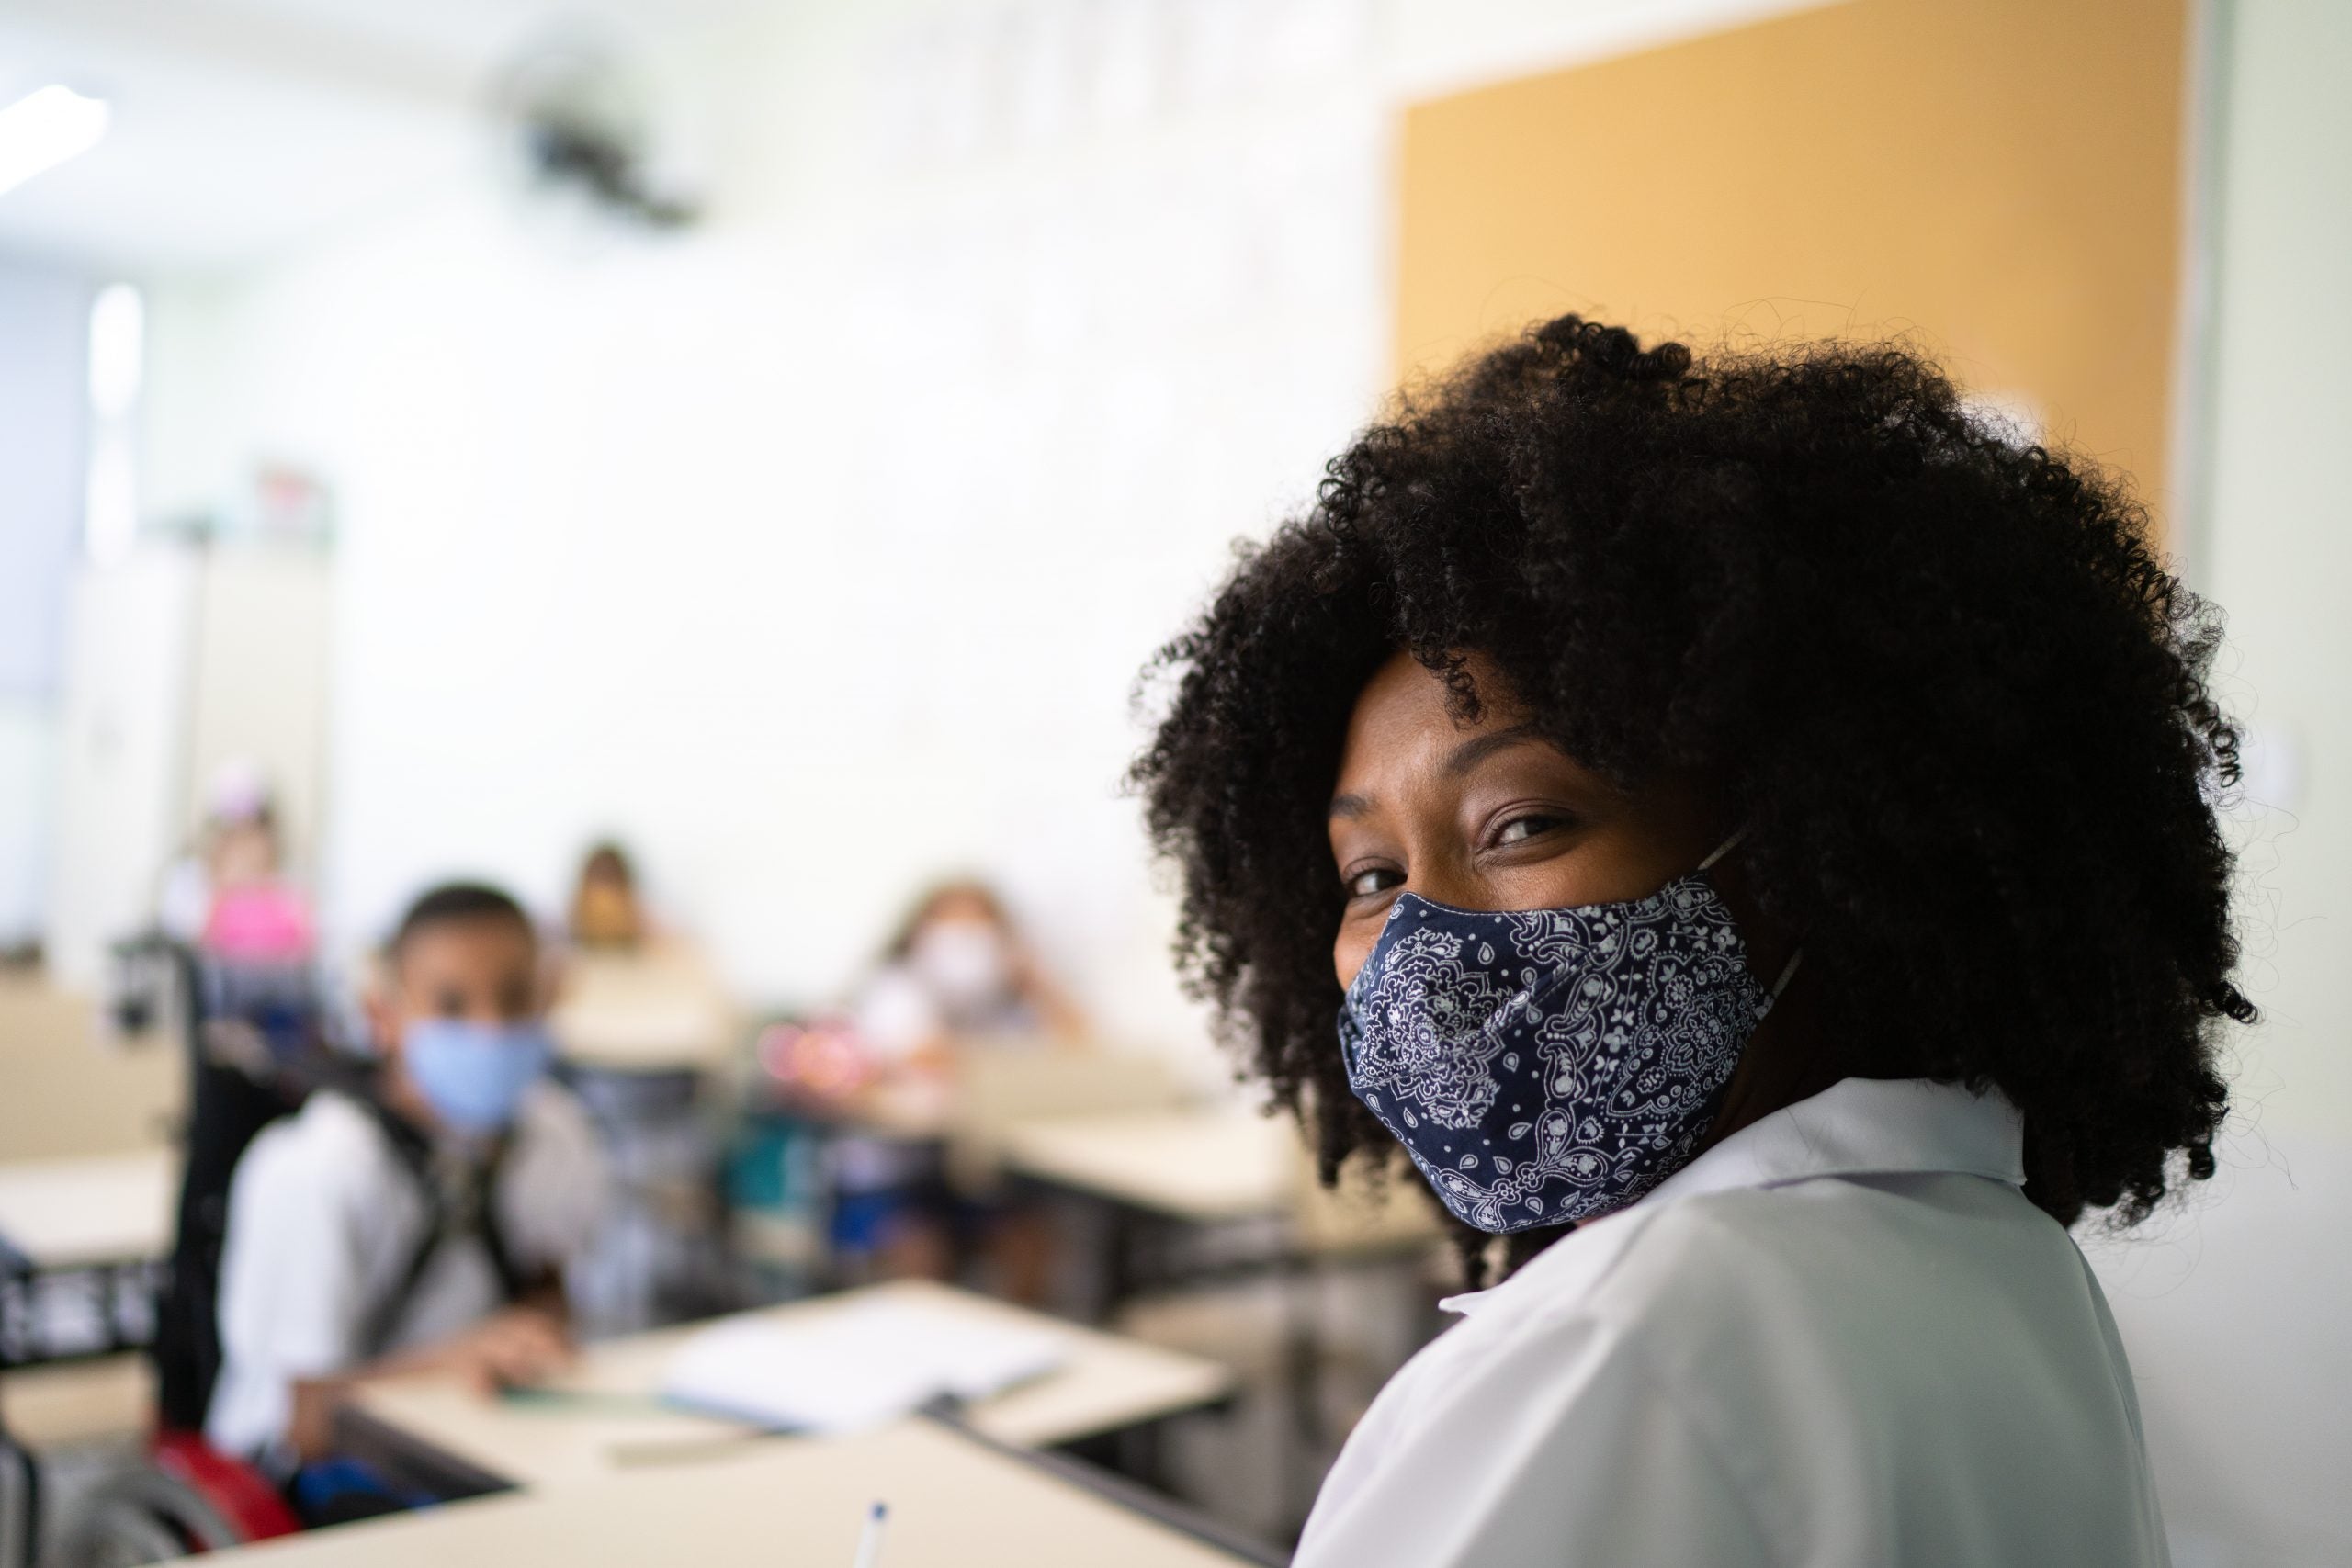 Teachers Find Ways to Release the Pressure During the Pandemic